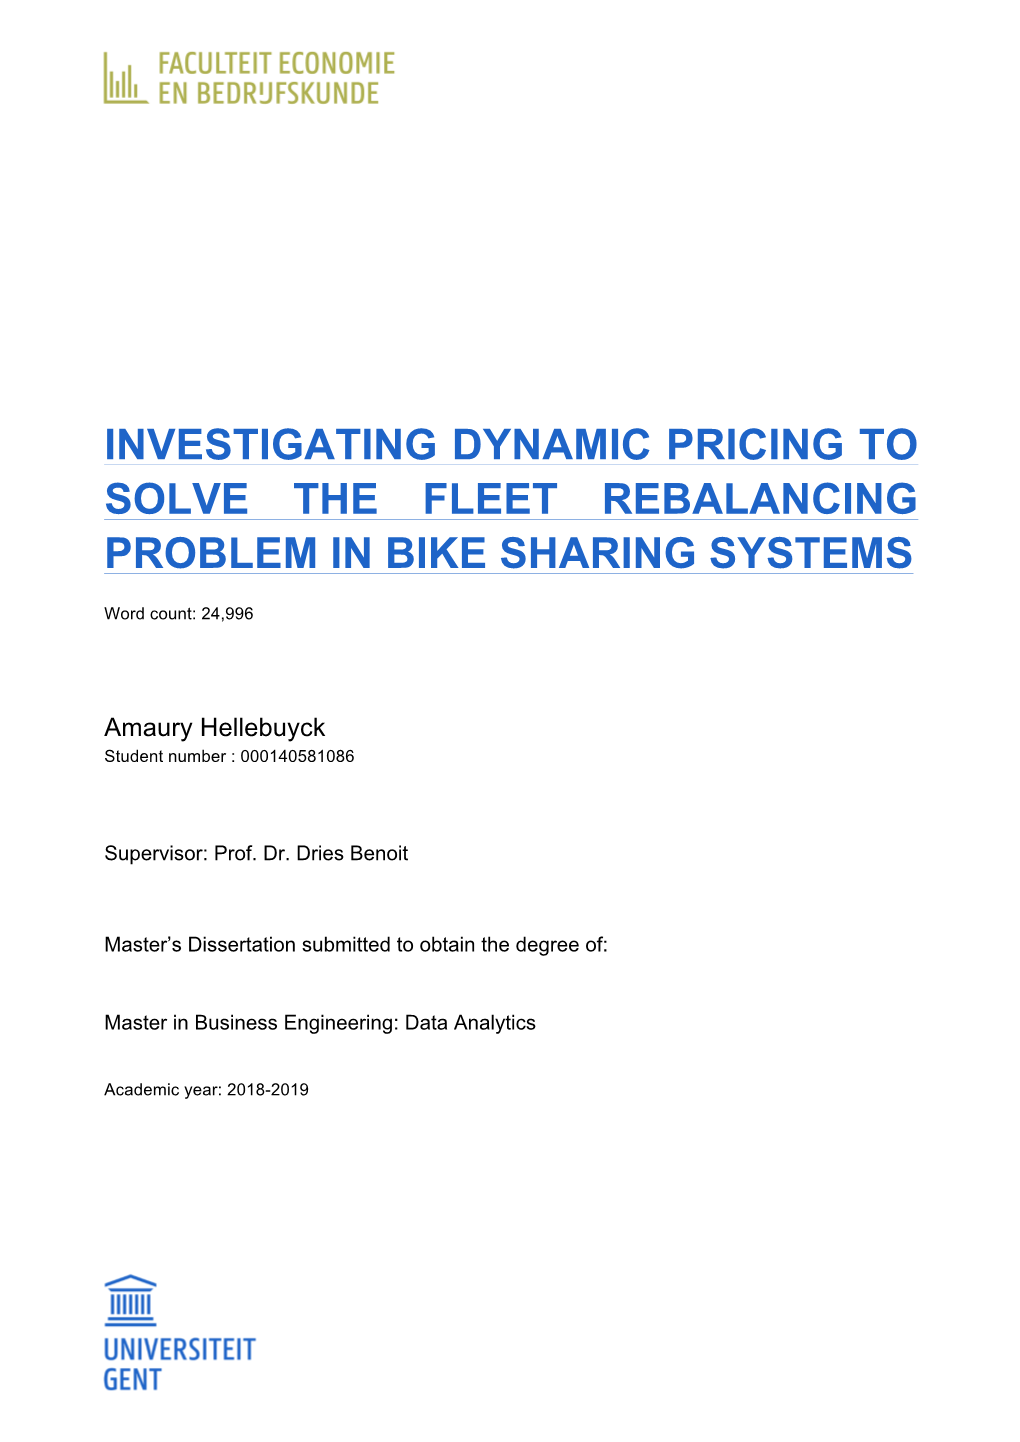 Investigating Dynamic Pricing to Solve the Fleet Rebalancing Problem in Bike Sharing Systems